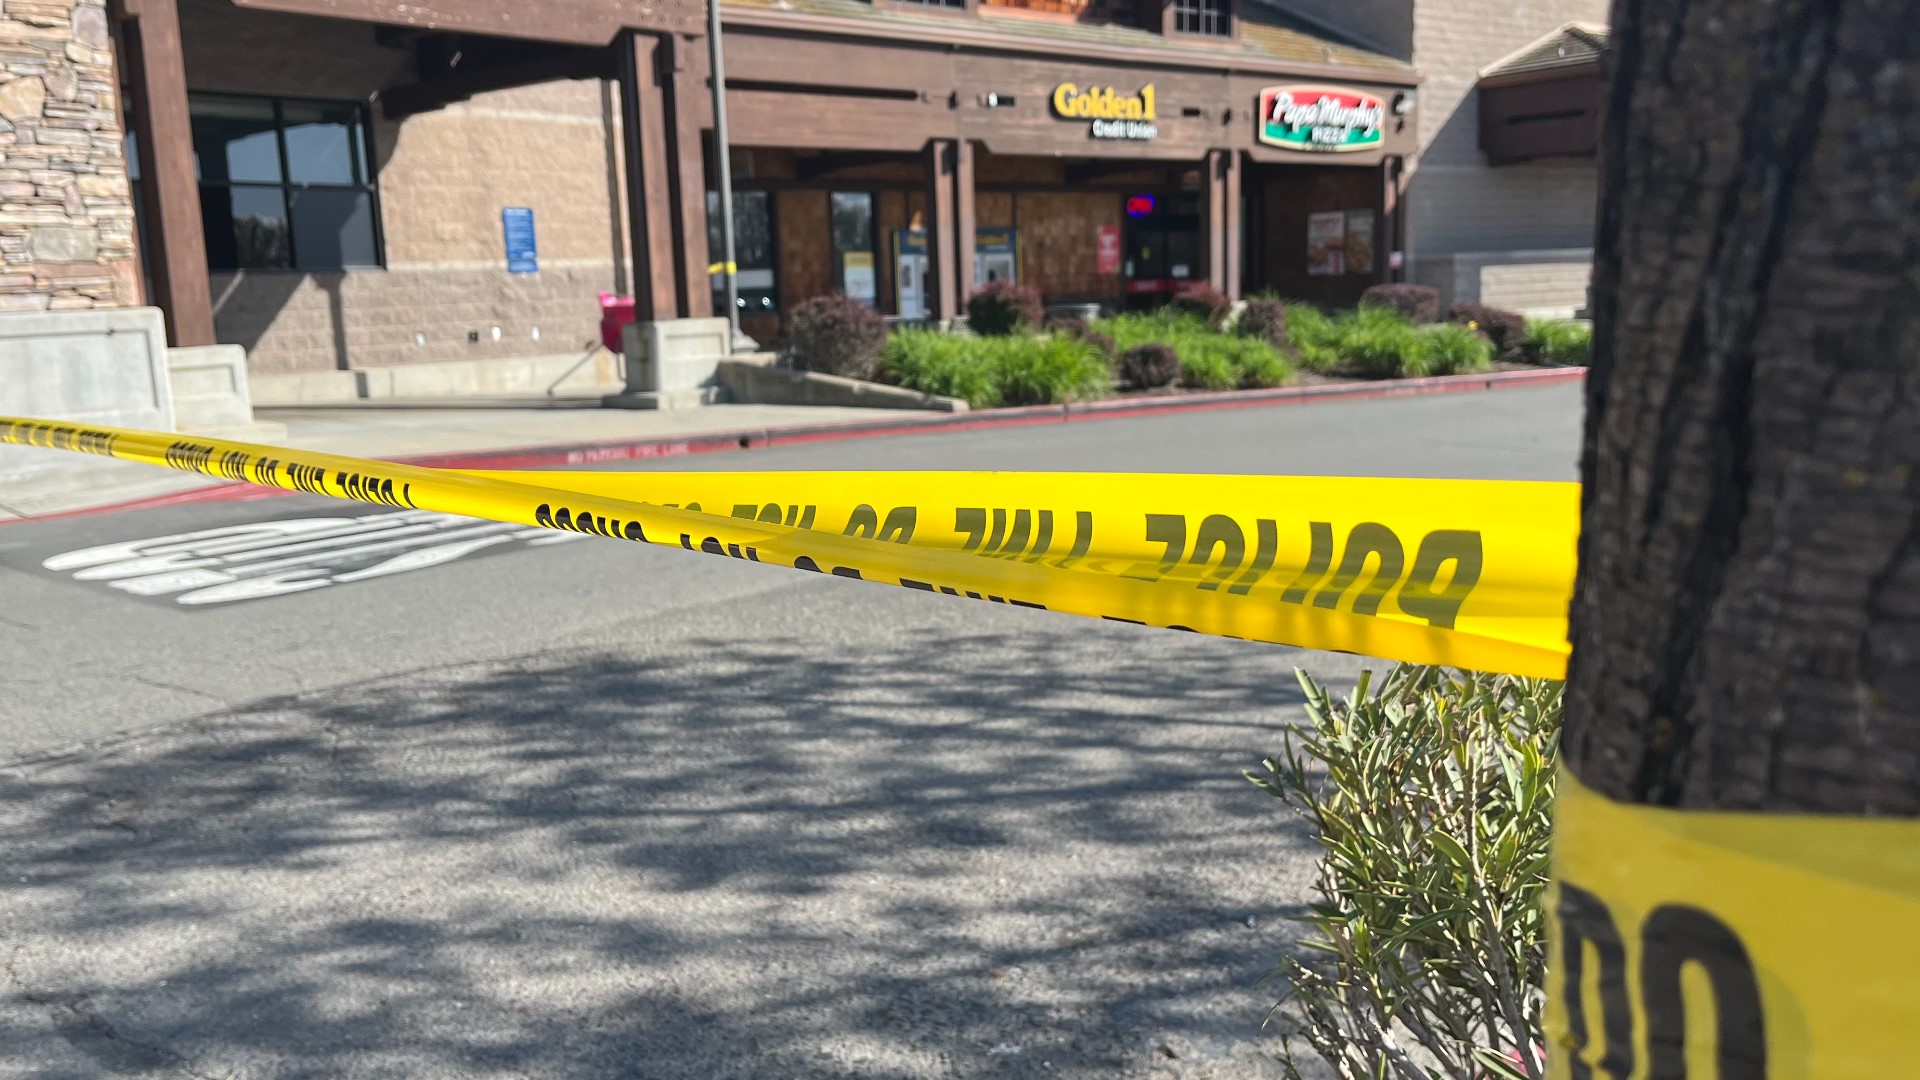 Around 12:15 p.m., the city of Lincoln posted to social media asking residents to avoid the area of Lincoln Boulevard near the Safeway shopping center.